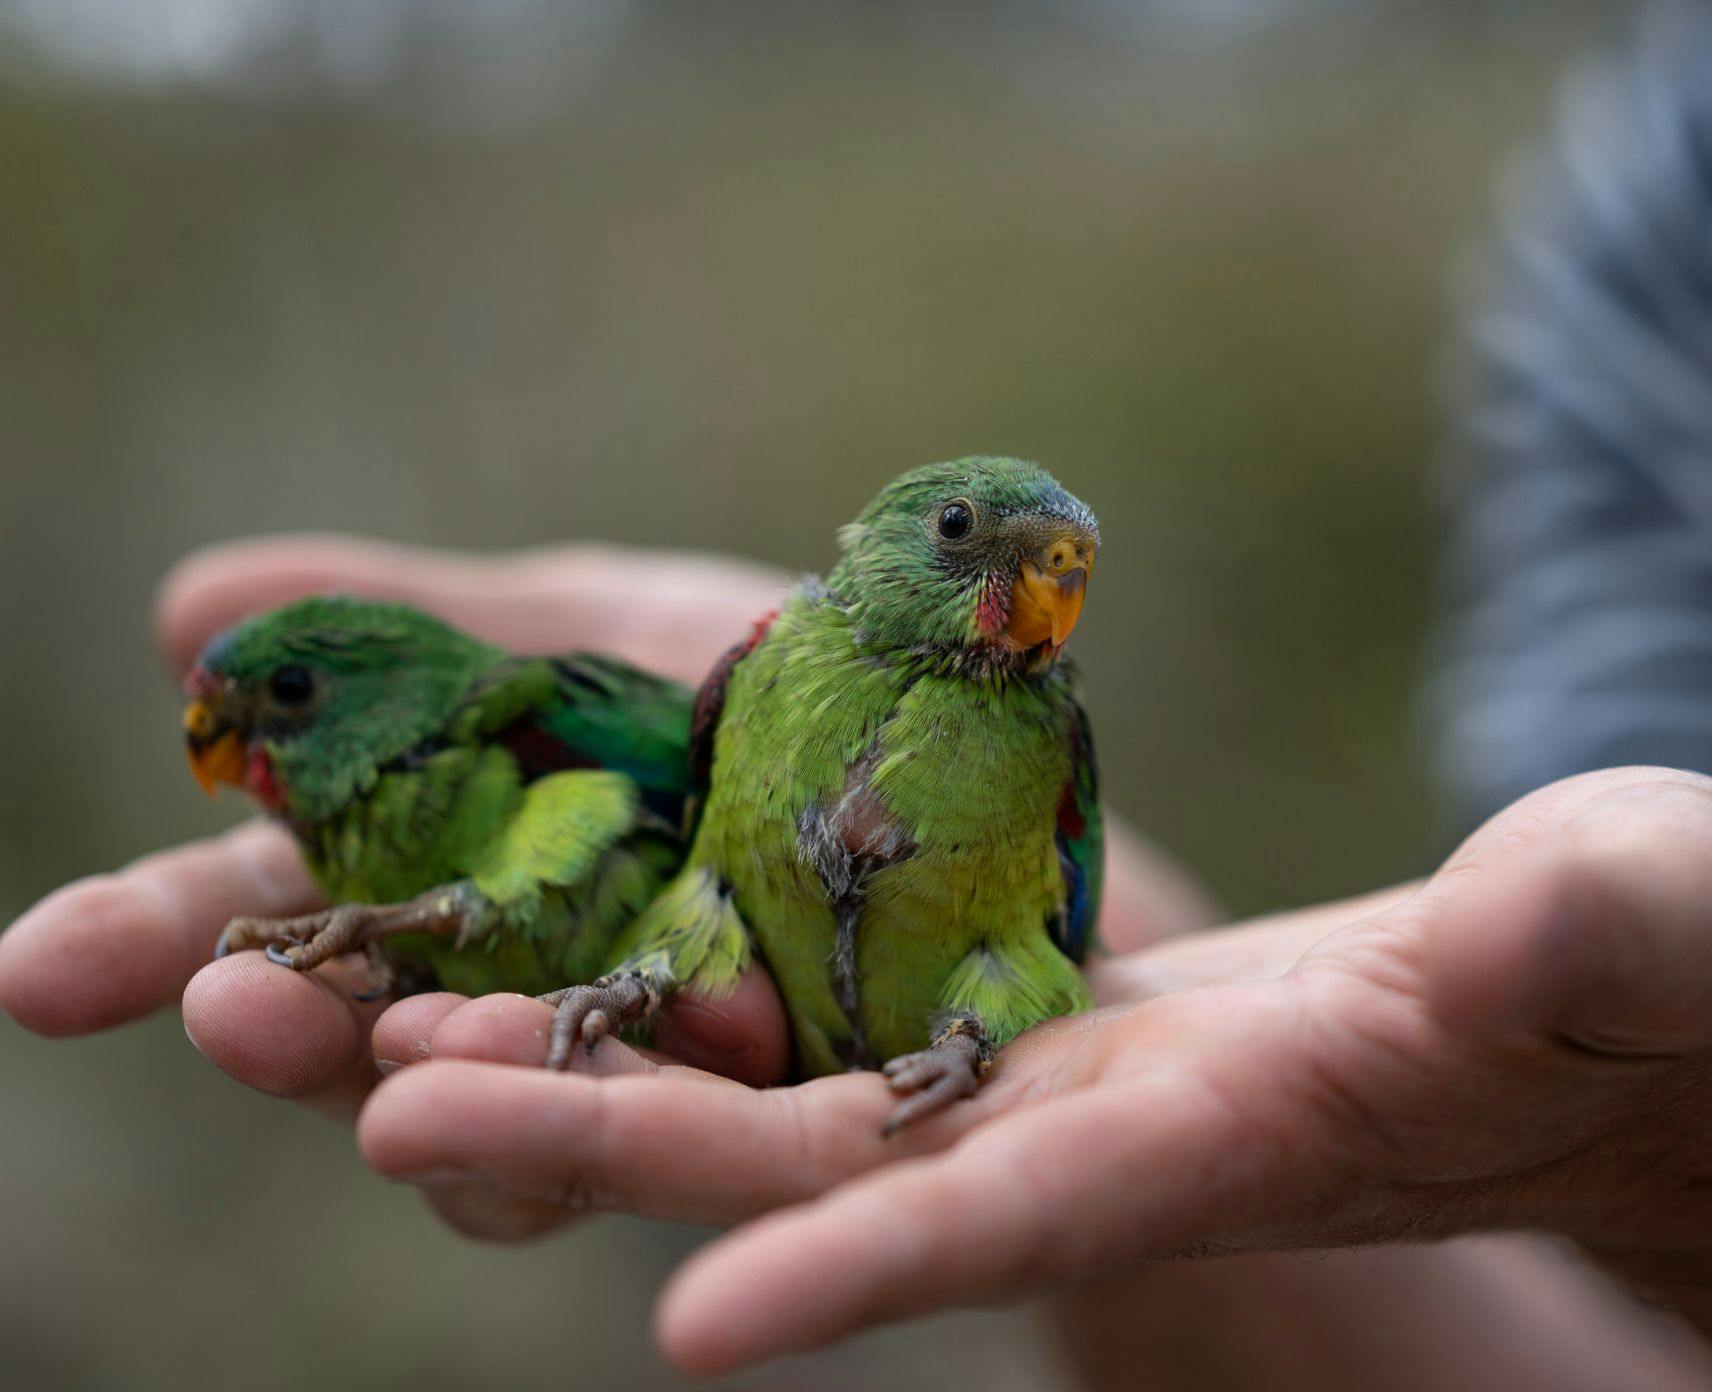 Two swift parrots sitting in an outstretched hand